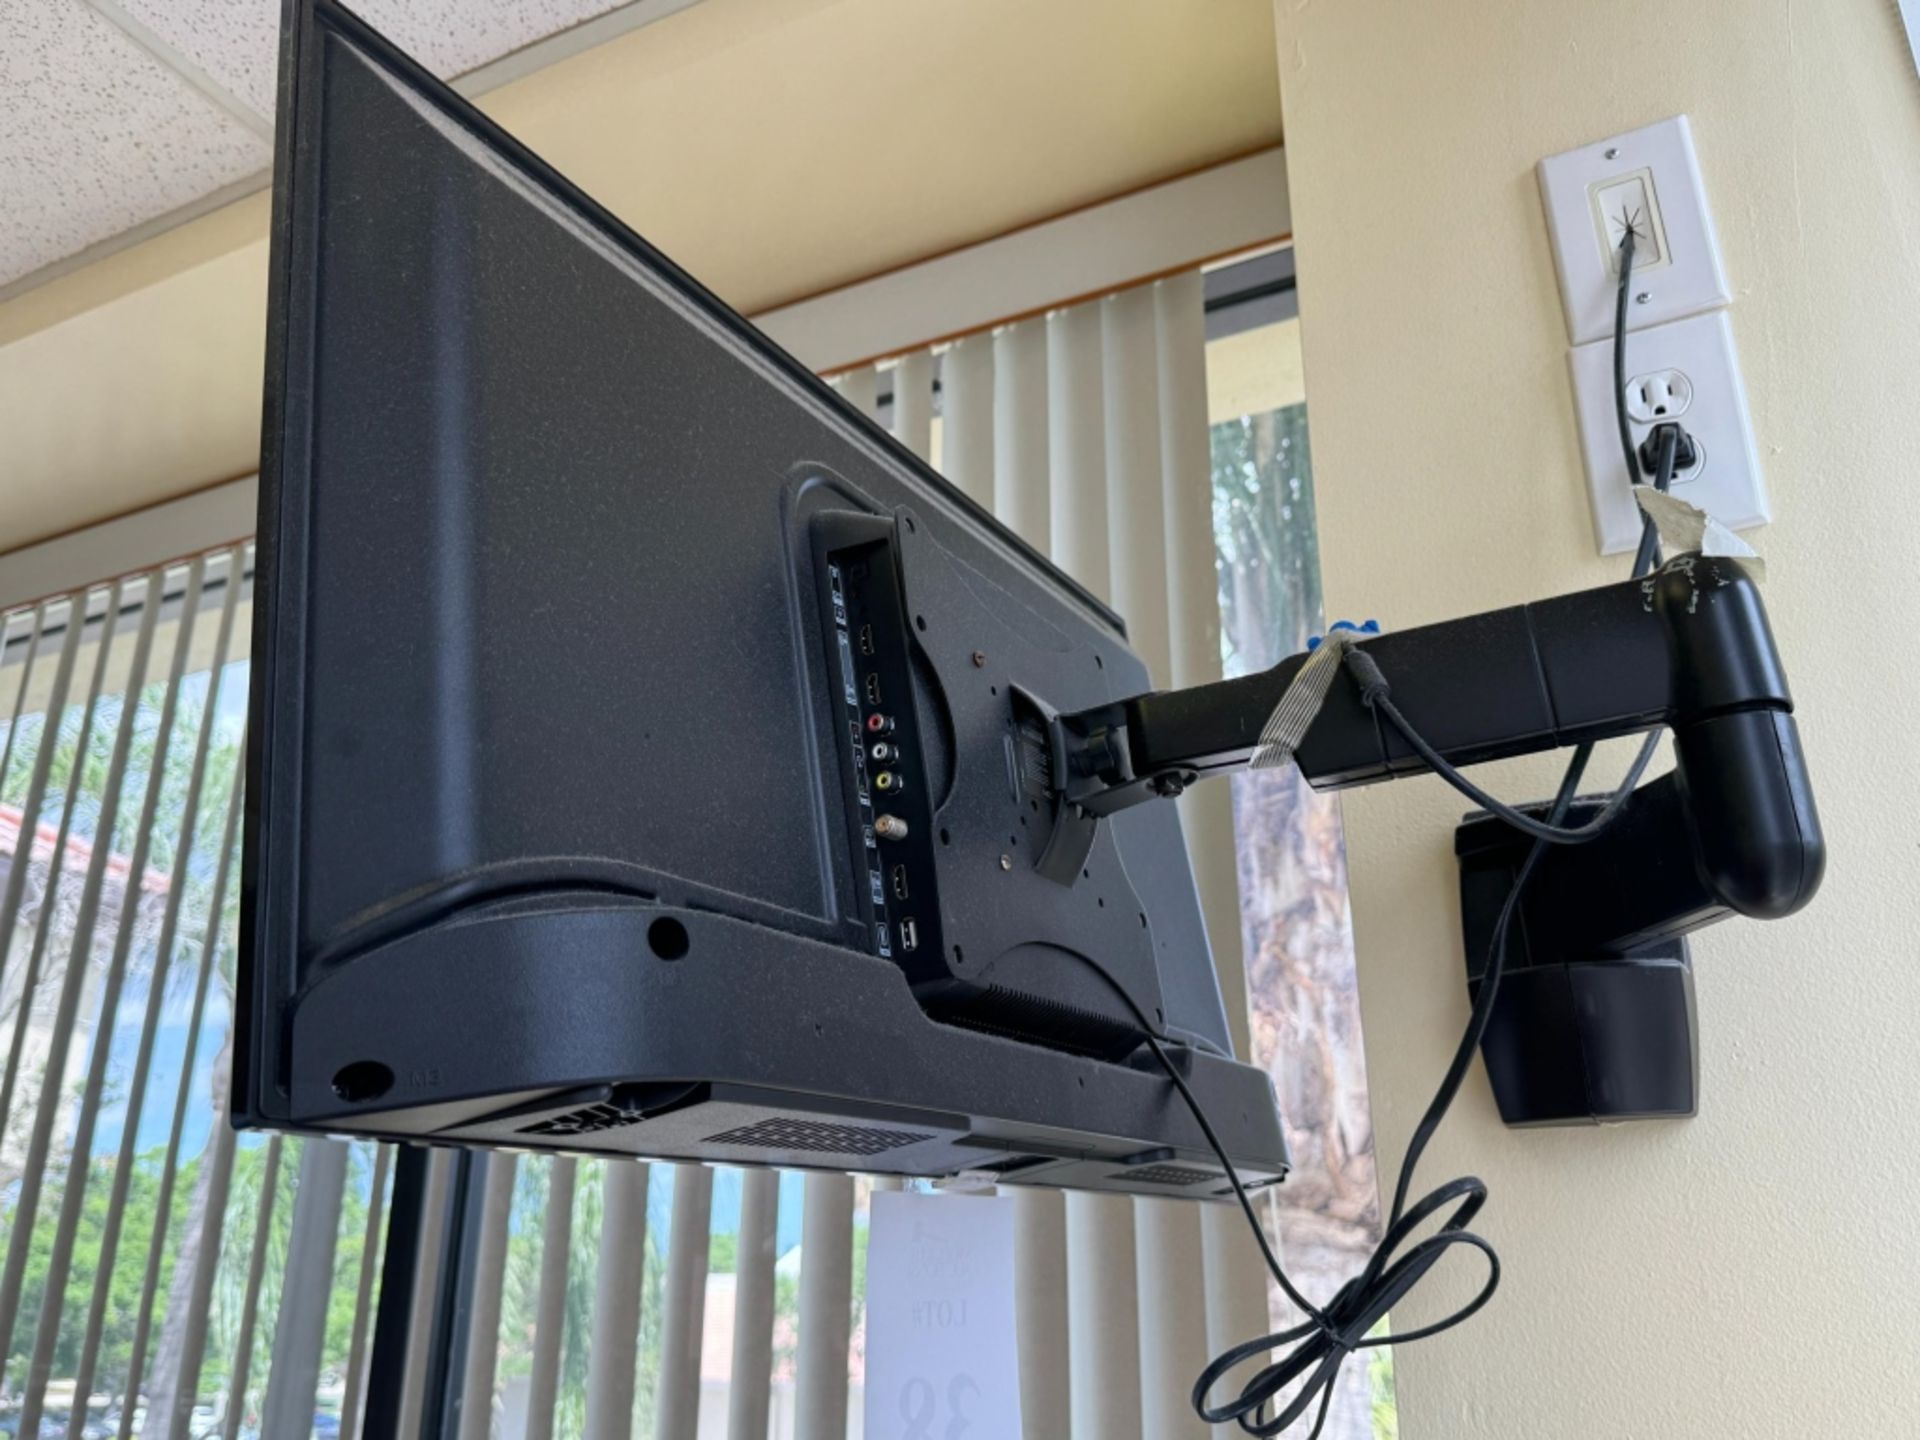 32" TCL TV WITH WALL MOUNT BRACKET - Image 2 of 2